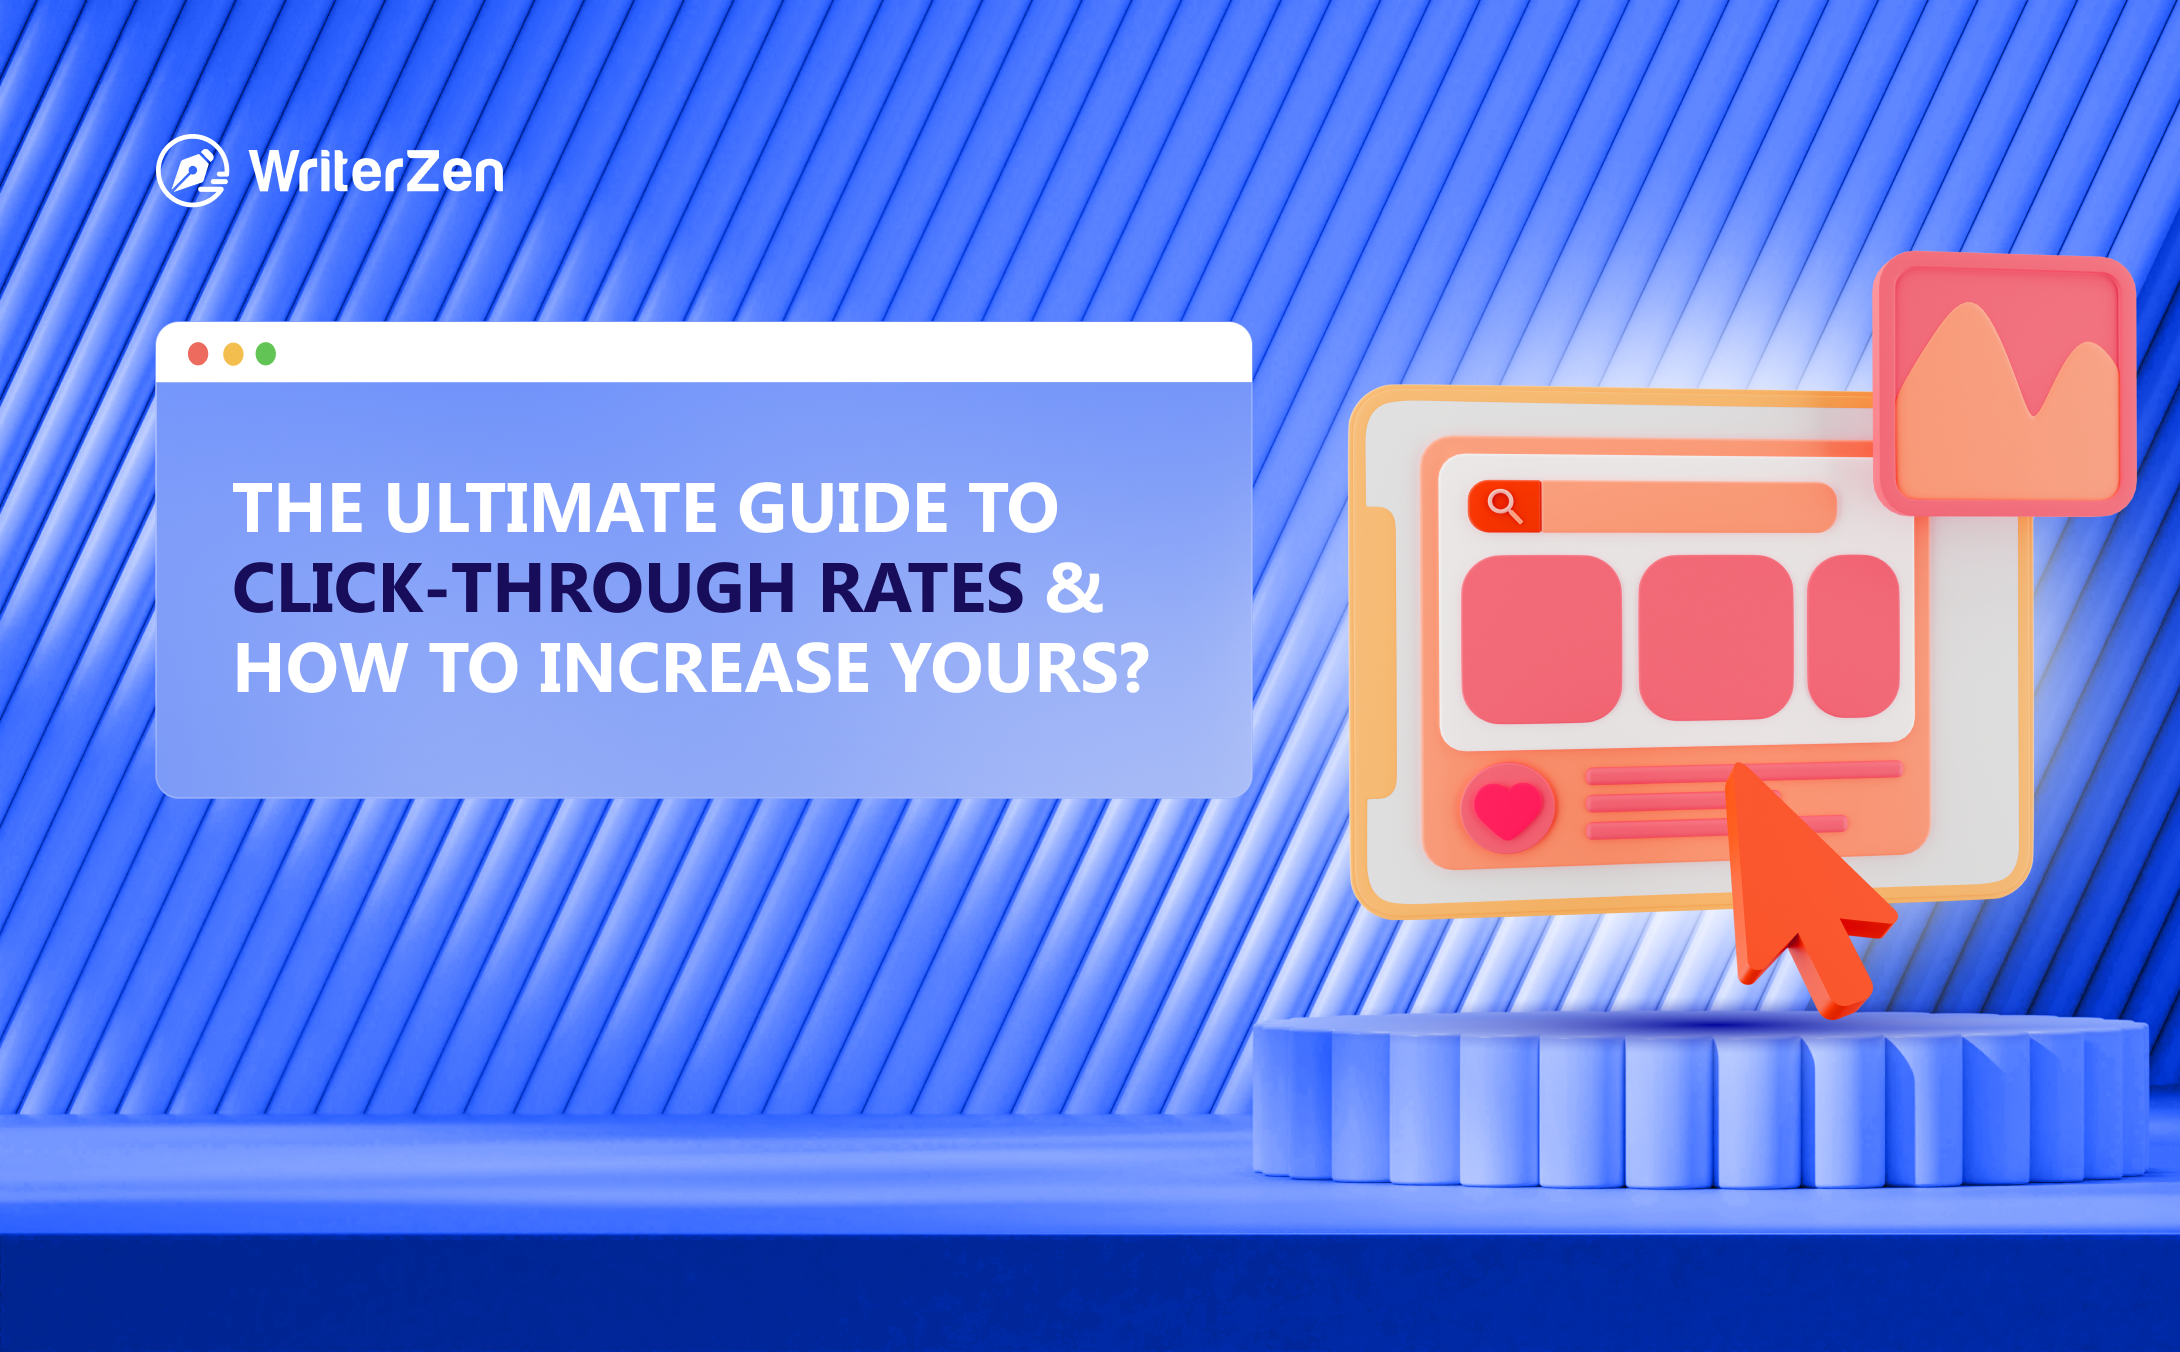 The Ultimate Guide to Click-through Rates and How to Increase Yours